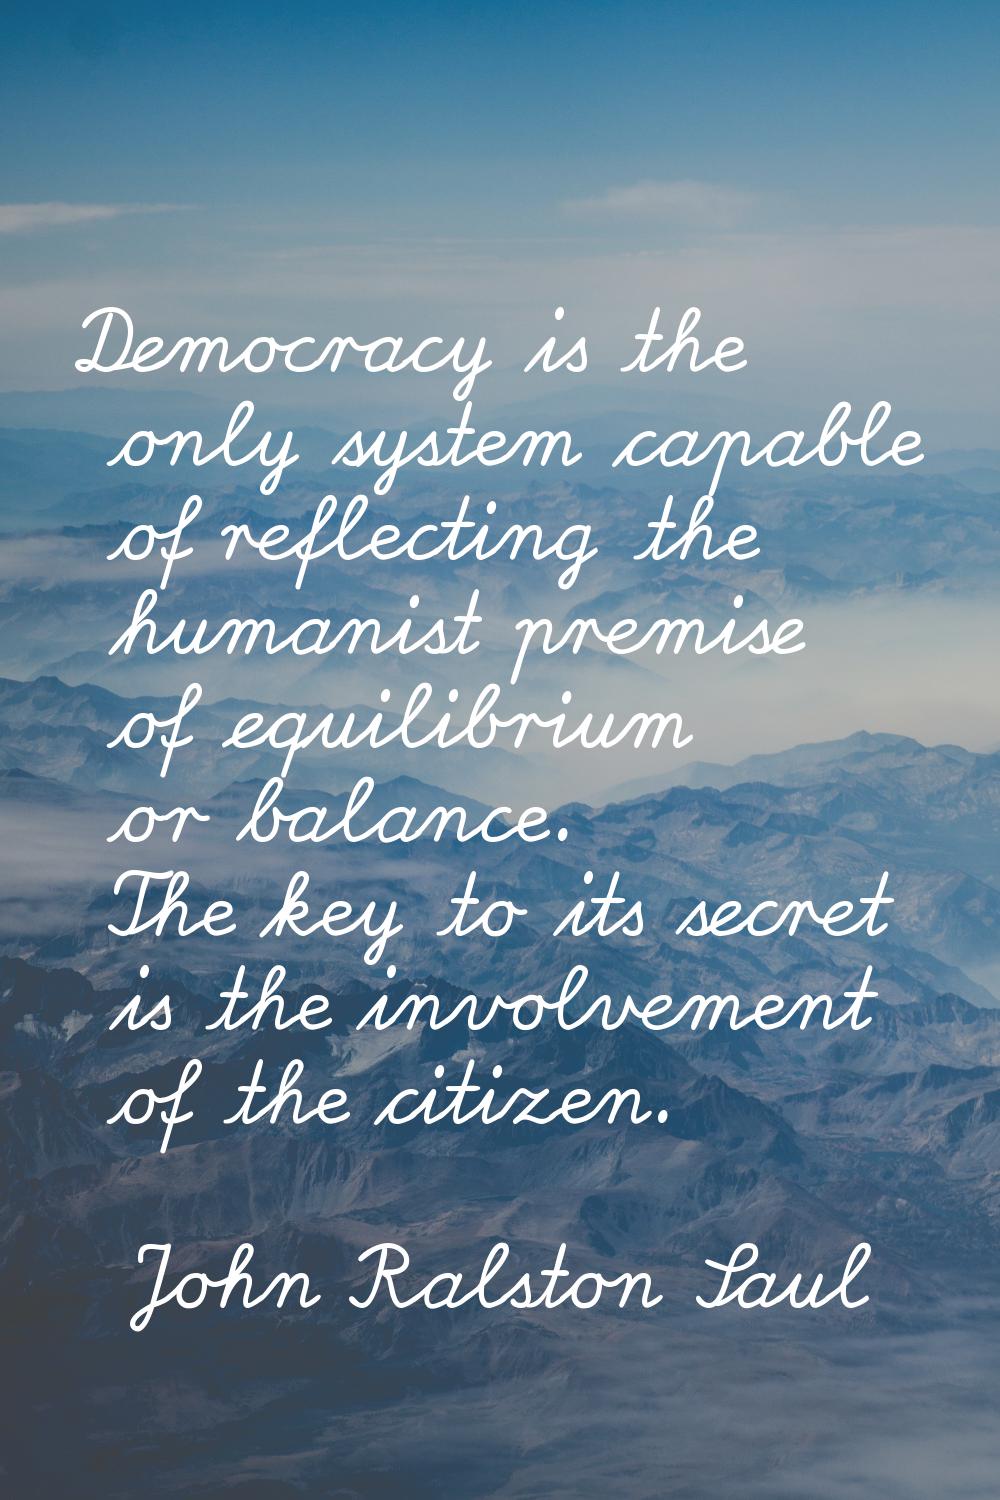 Democracy is the only system capable of reflecting the humanist premise of equilibrium or balance. 